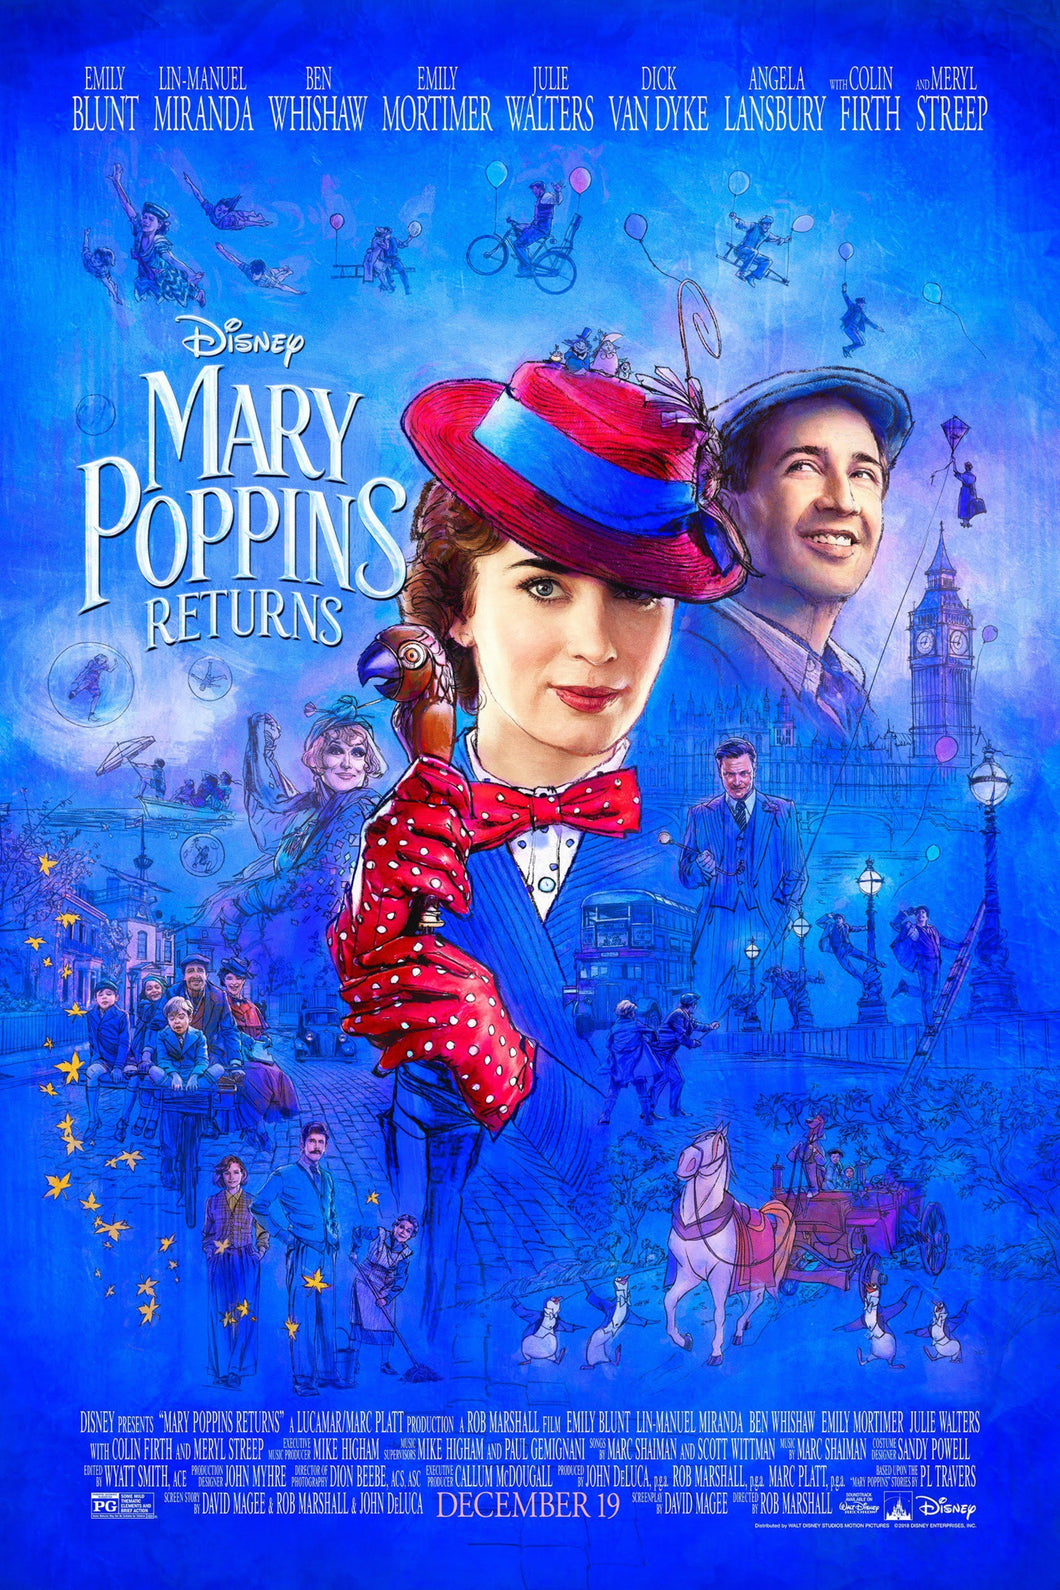 Dick Van Dyke signed Mary Poppins Returns Poster Image (8x10, 11x17)